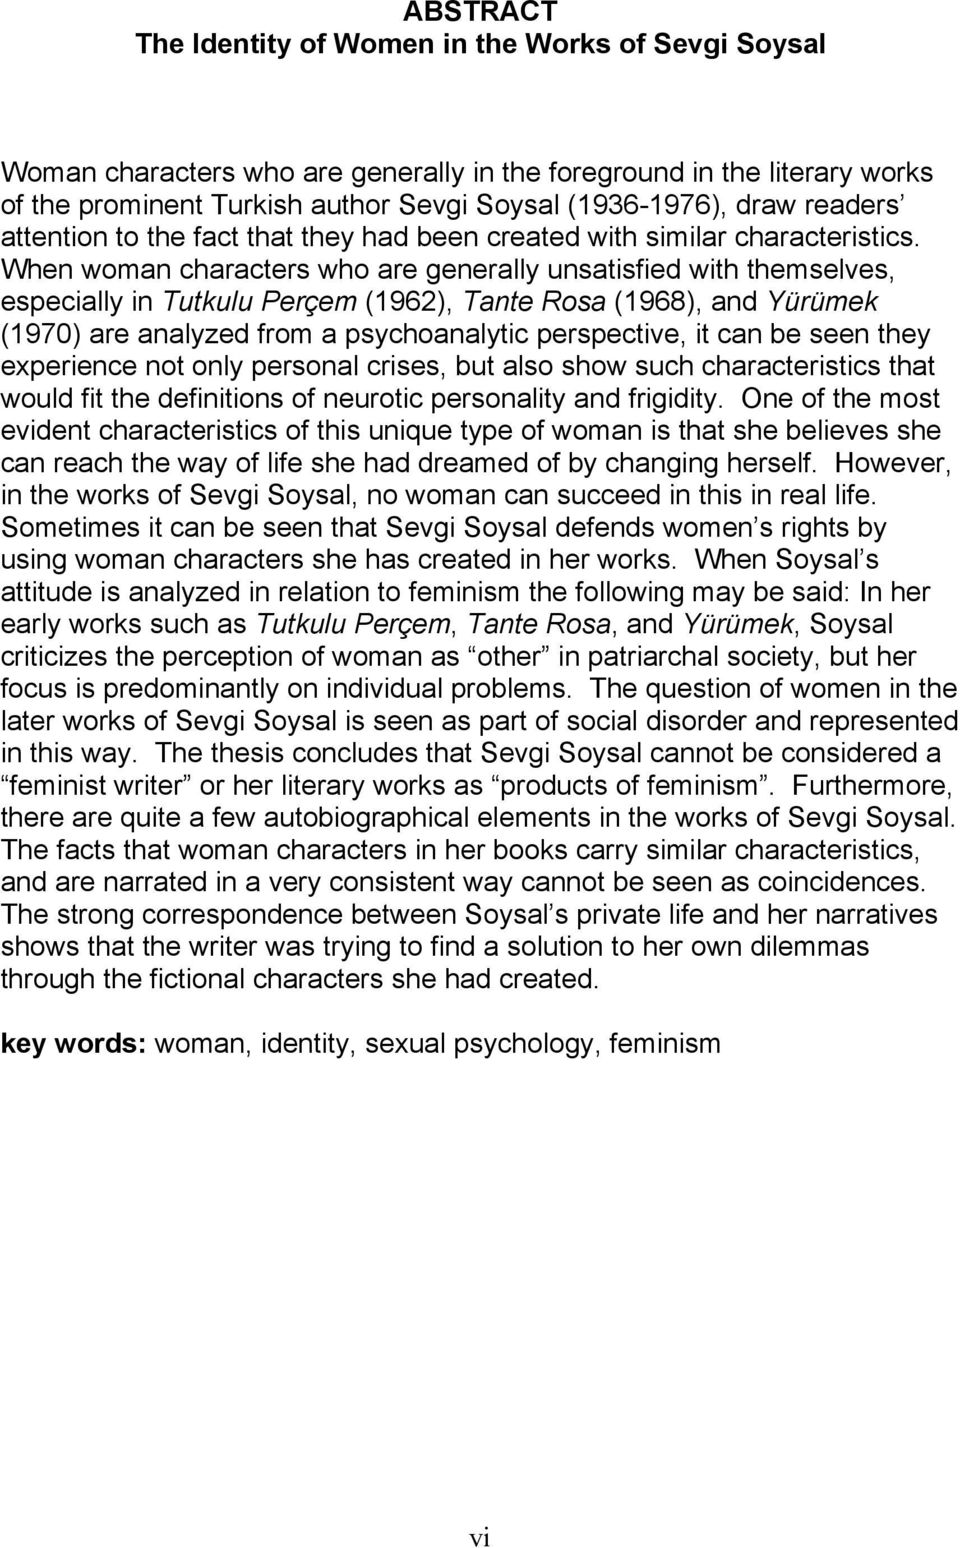 When woman characters who are generally unsatisfied with themselves, especially in Tutkulu Perçem (1962), Tante Rosa (1968), and Yürümek (1970) are analyzed from a psychoanalytic perspective, it can